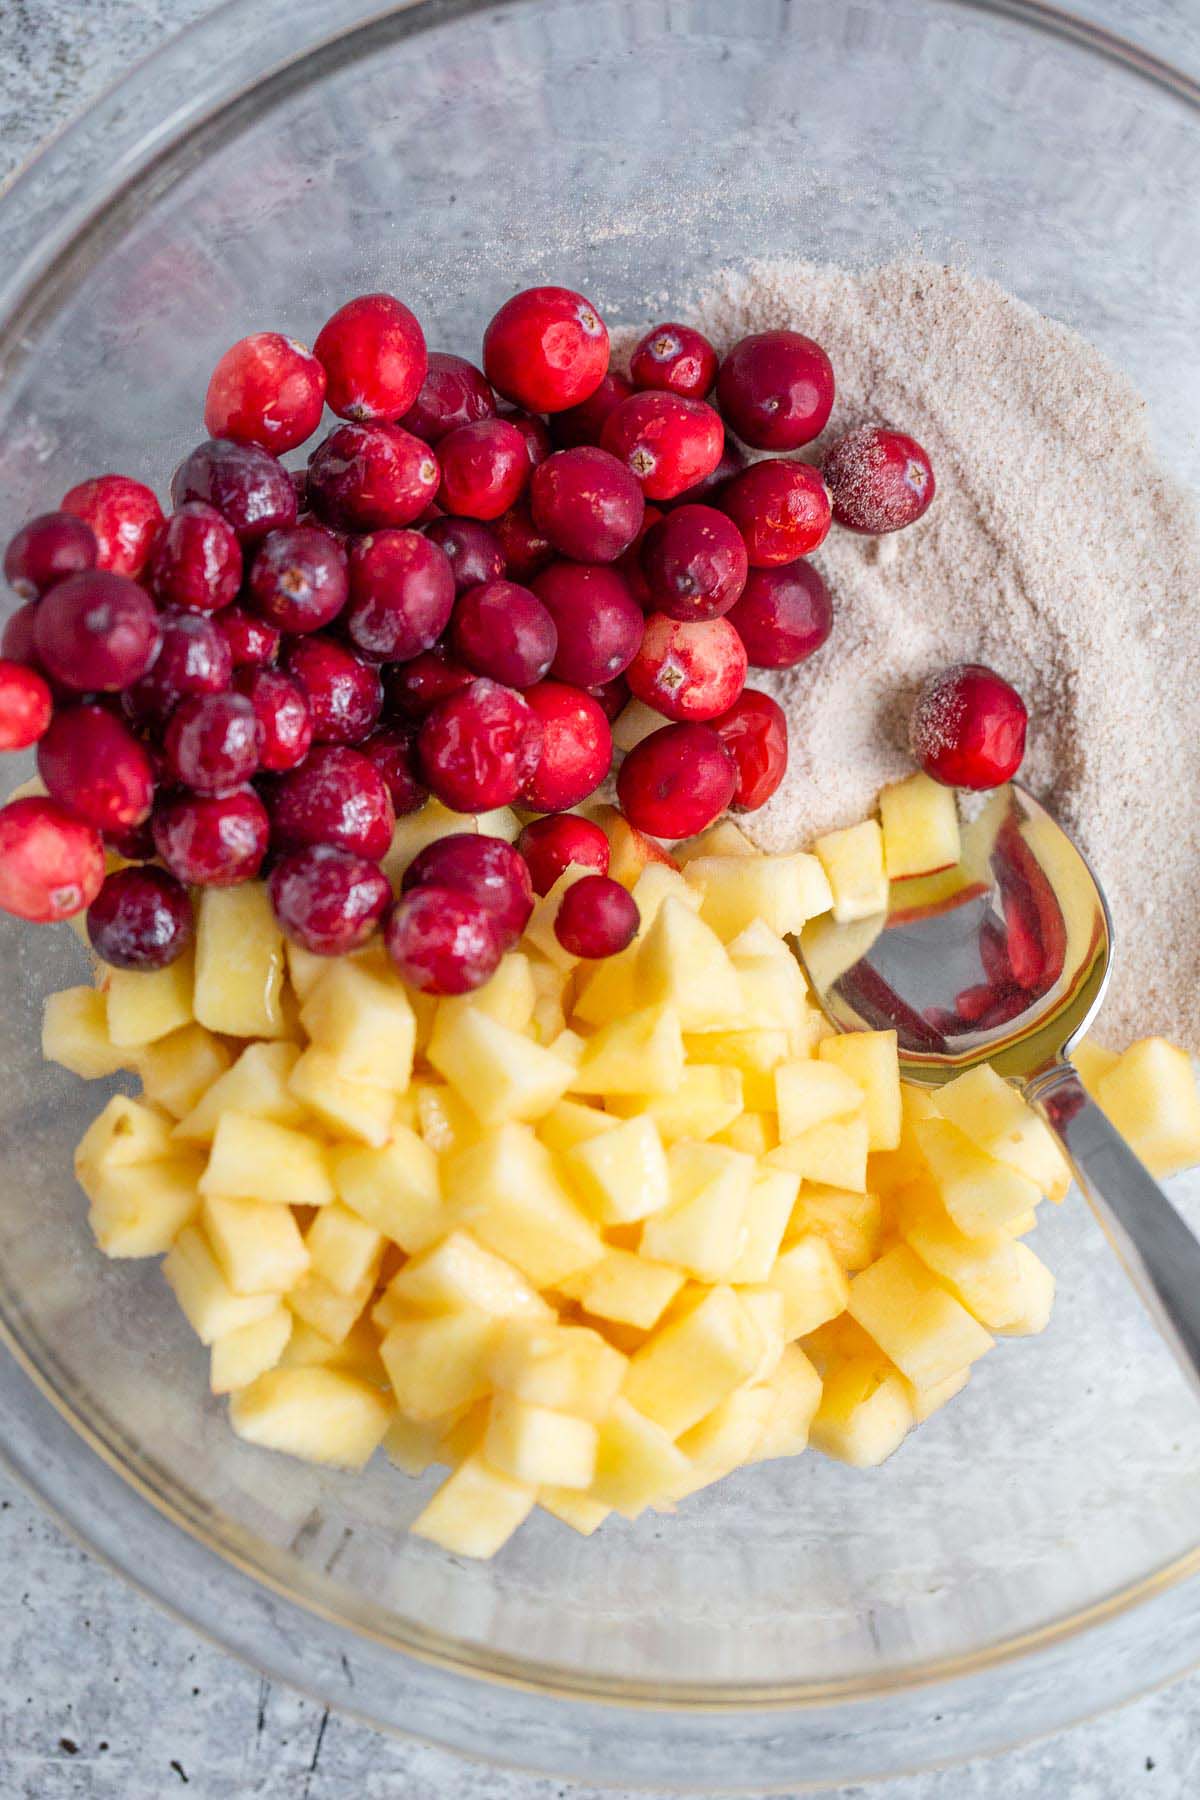 Apples, cranberries, and sugar in a large bowl.